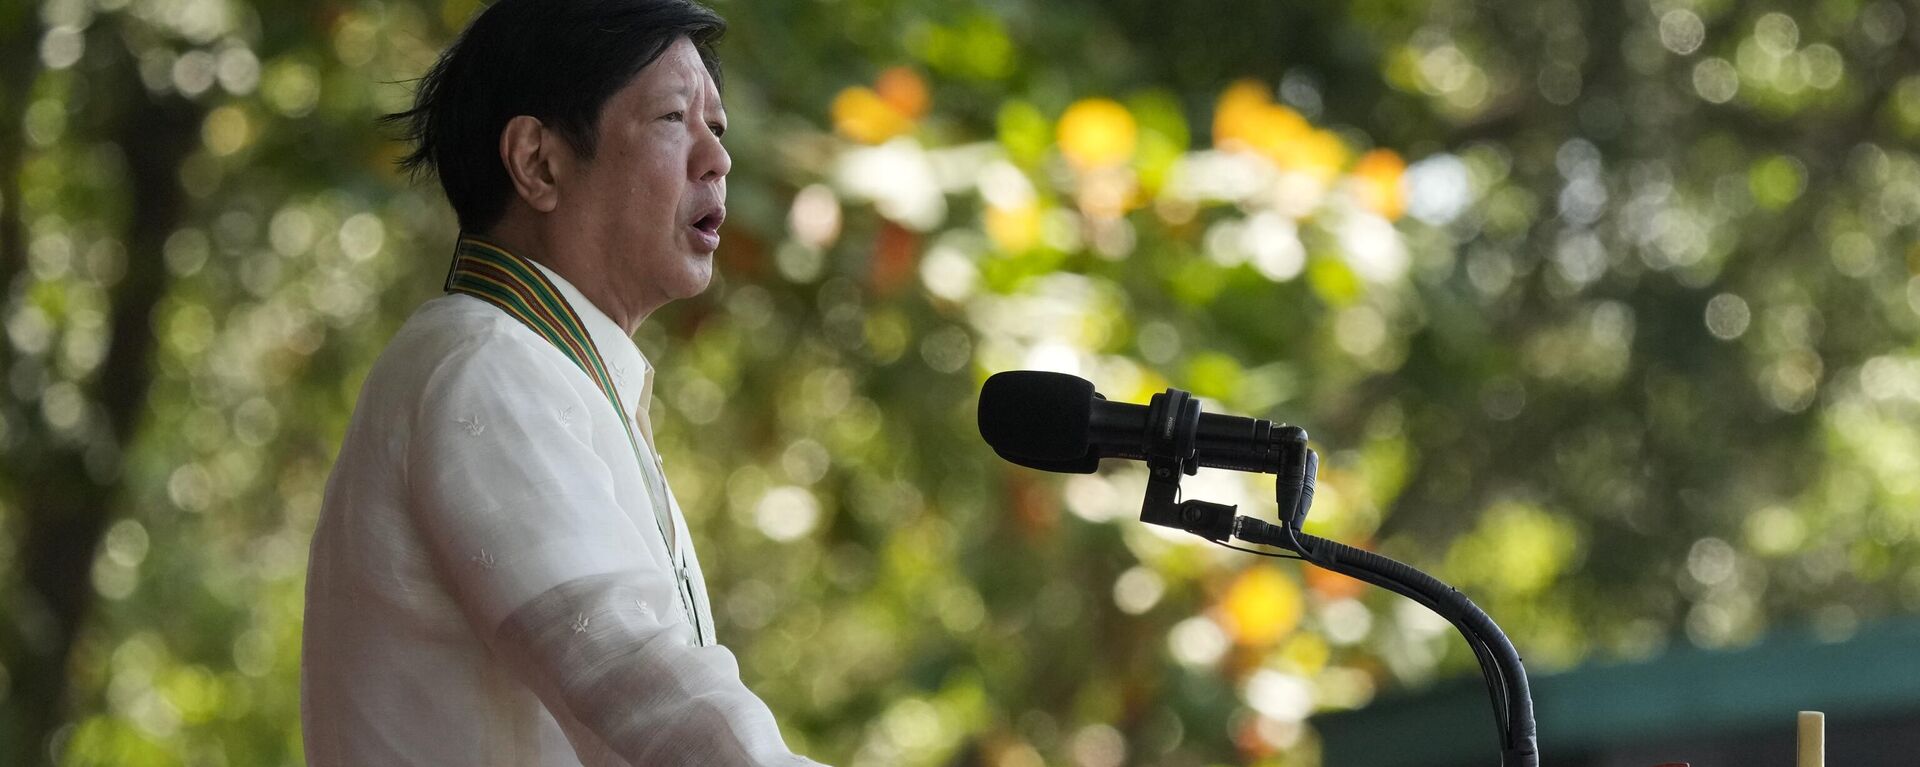 Philippine President Ferdinand Marcos Jr. delivers his speech at the 126th founding anniversary of the Philippine Army at Fort Bonifacio in Taguig, Philippines on Wednesday, March 22, 2023. - Sputnik International, 1920, 01.05.2023